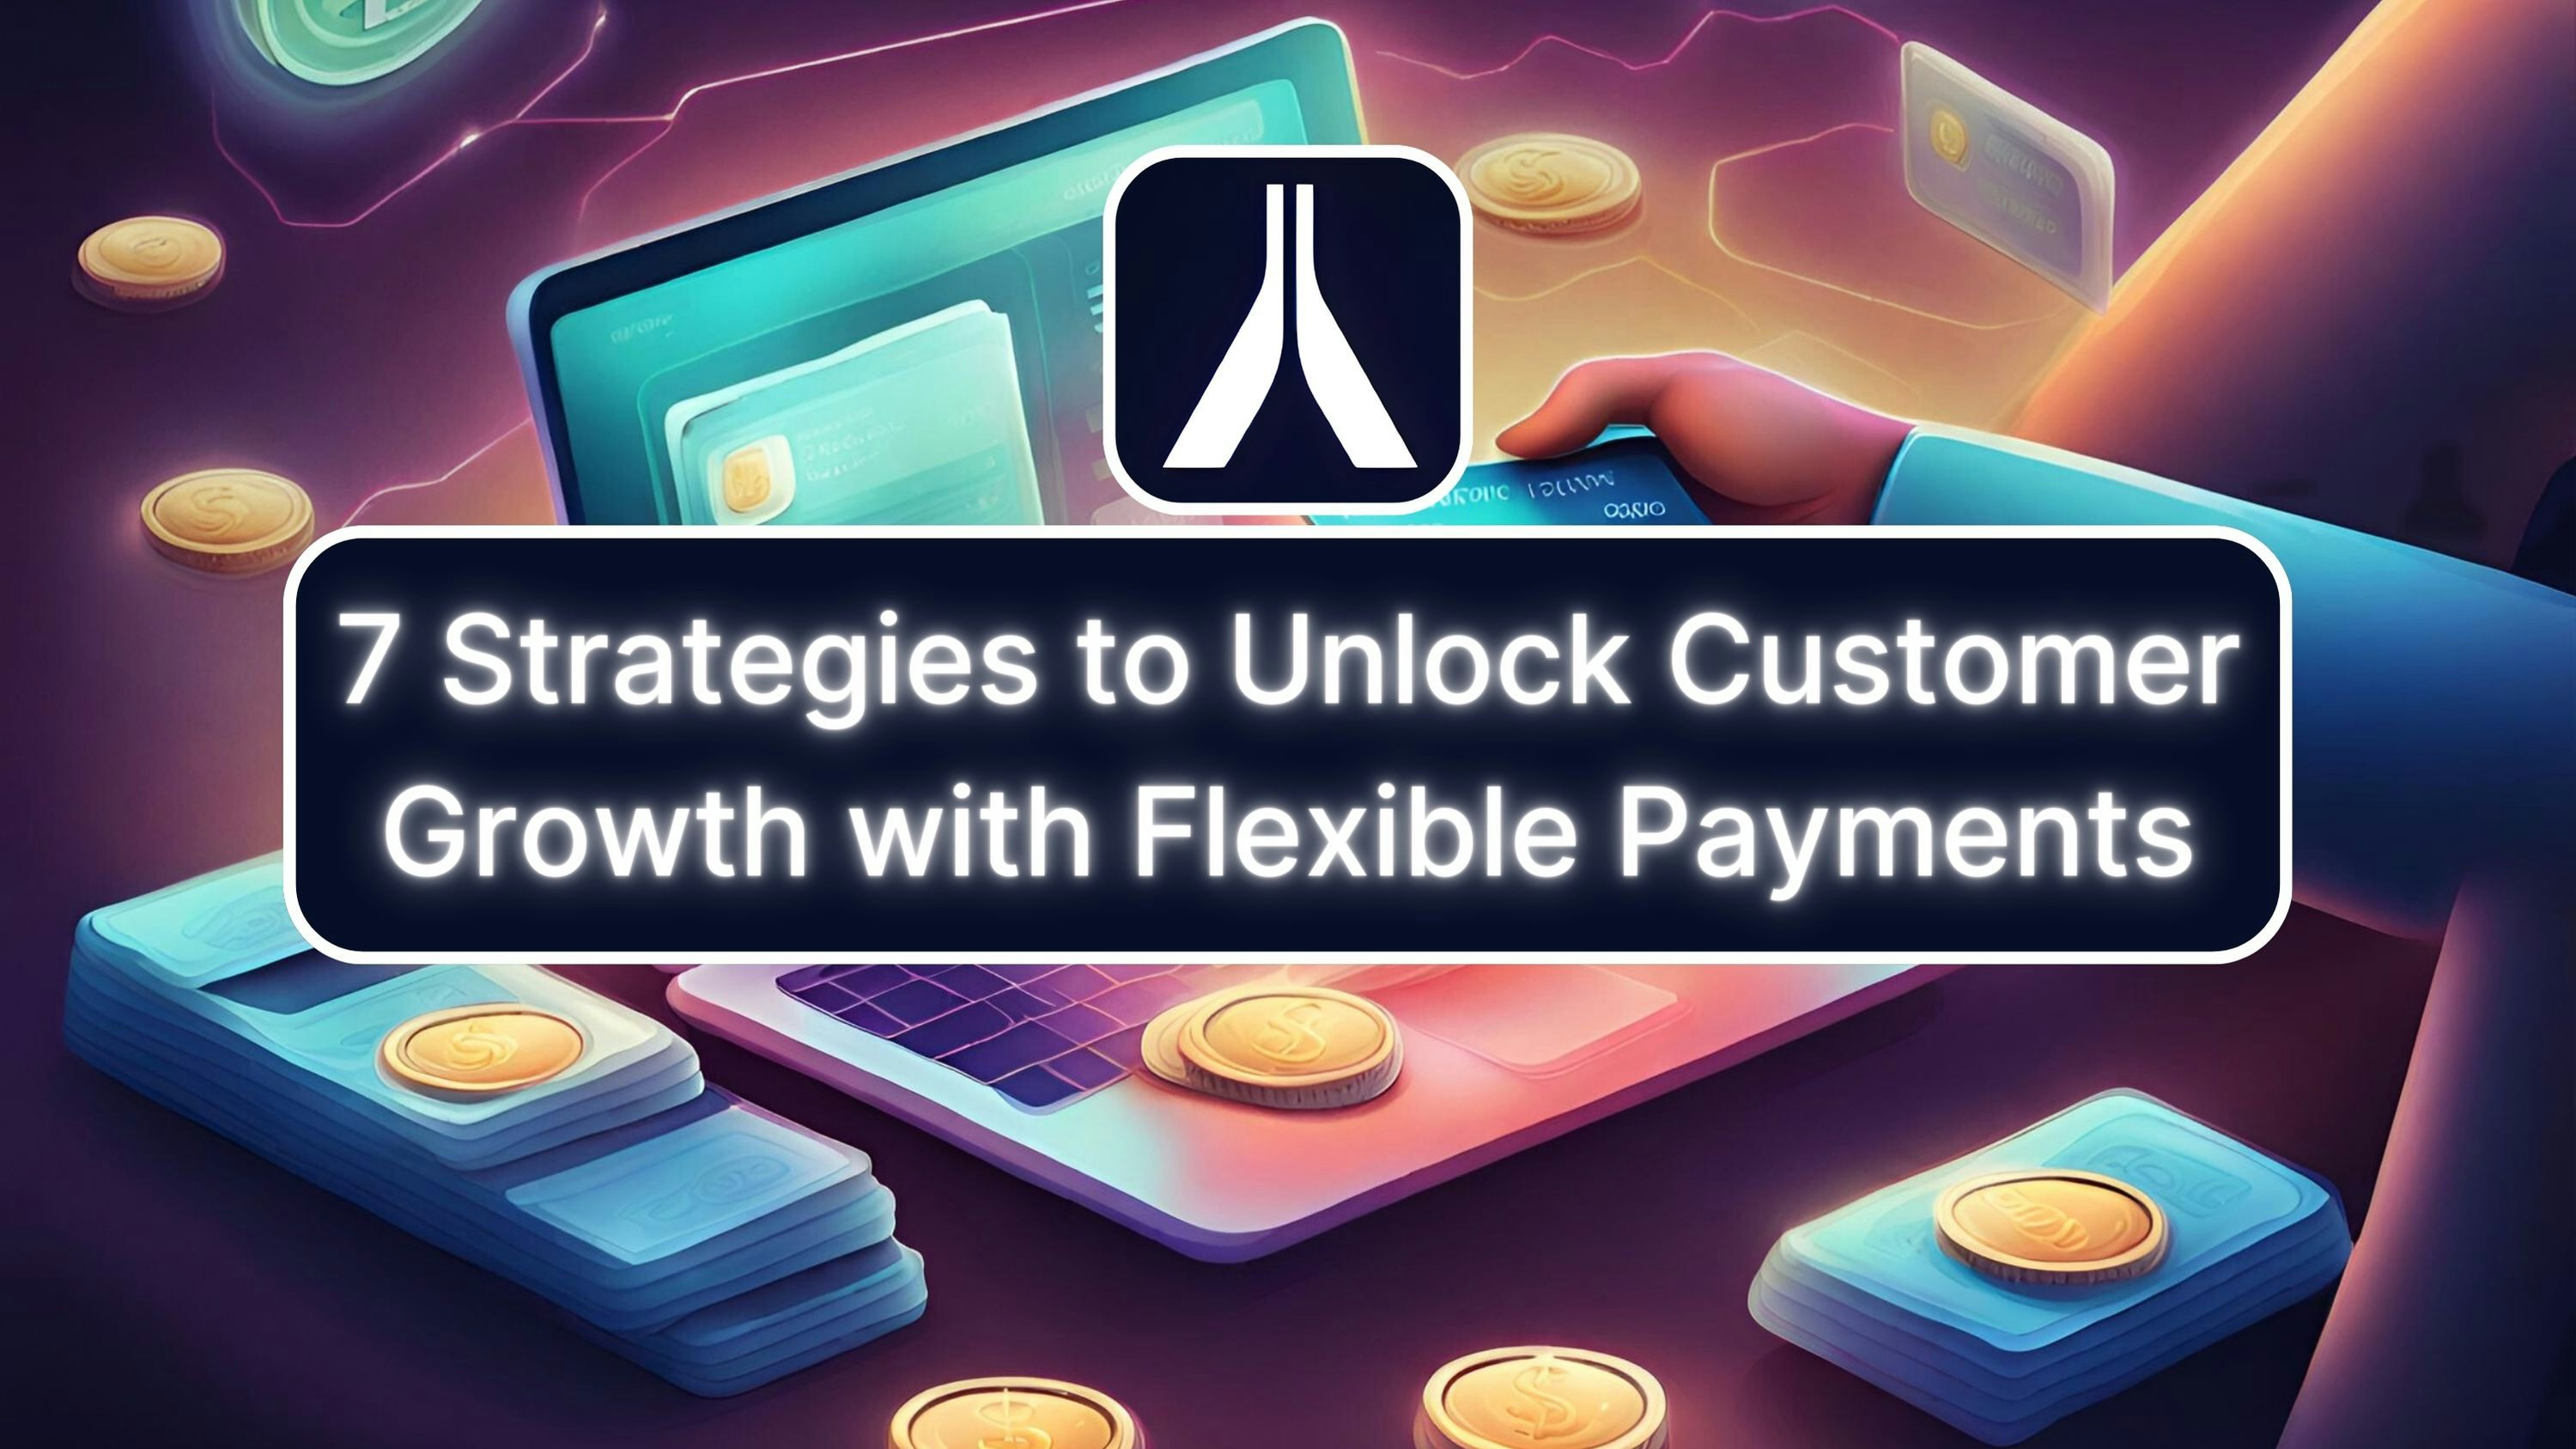 An illustrative banner featuring "7 Strategies to Unlock Customer Growth with Flexible Payments" with digital coins and payment cards.